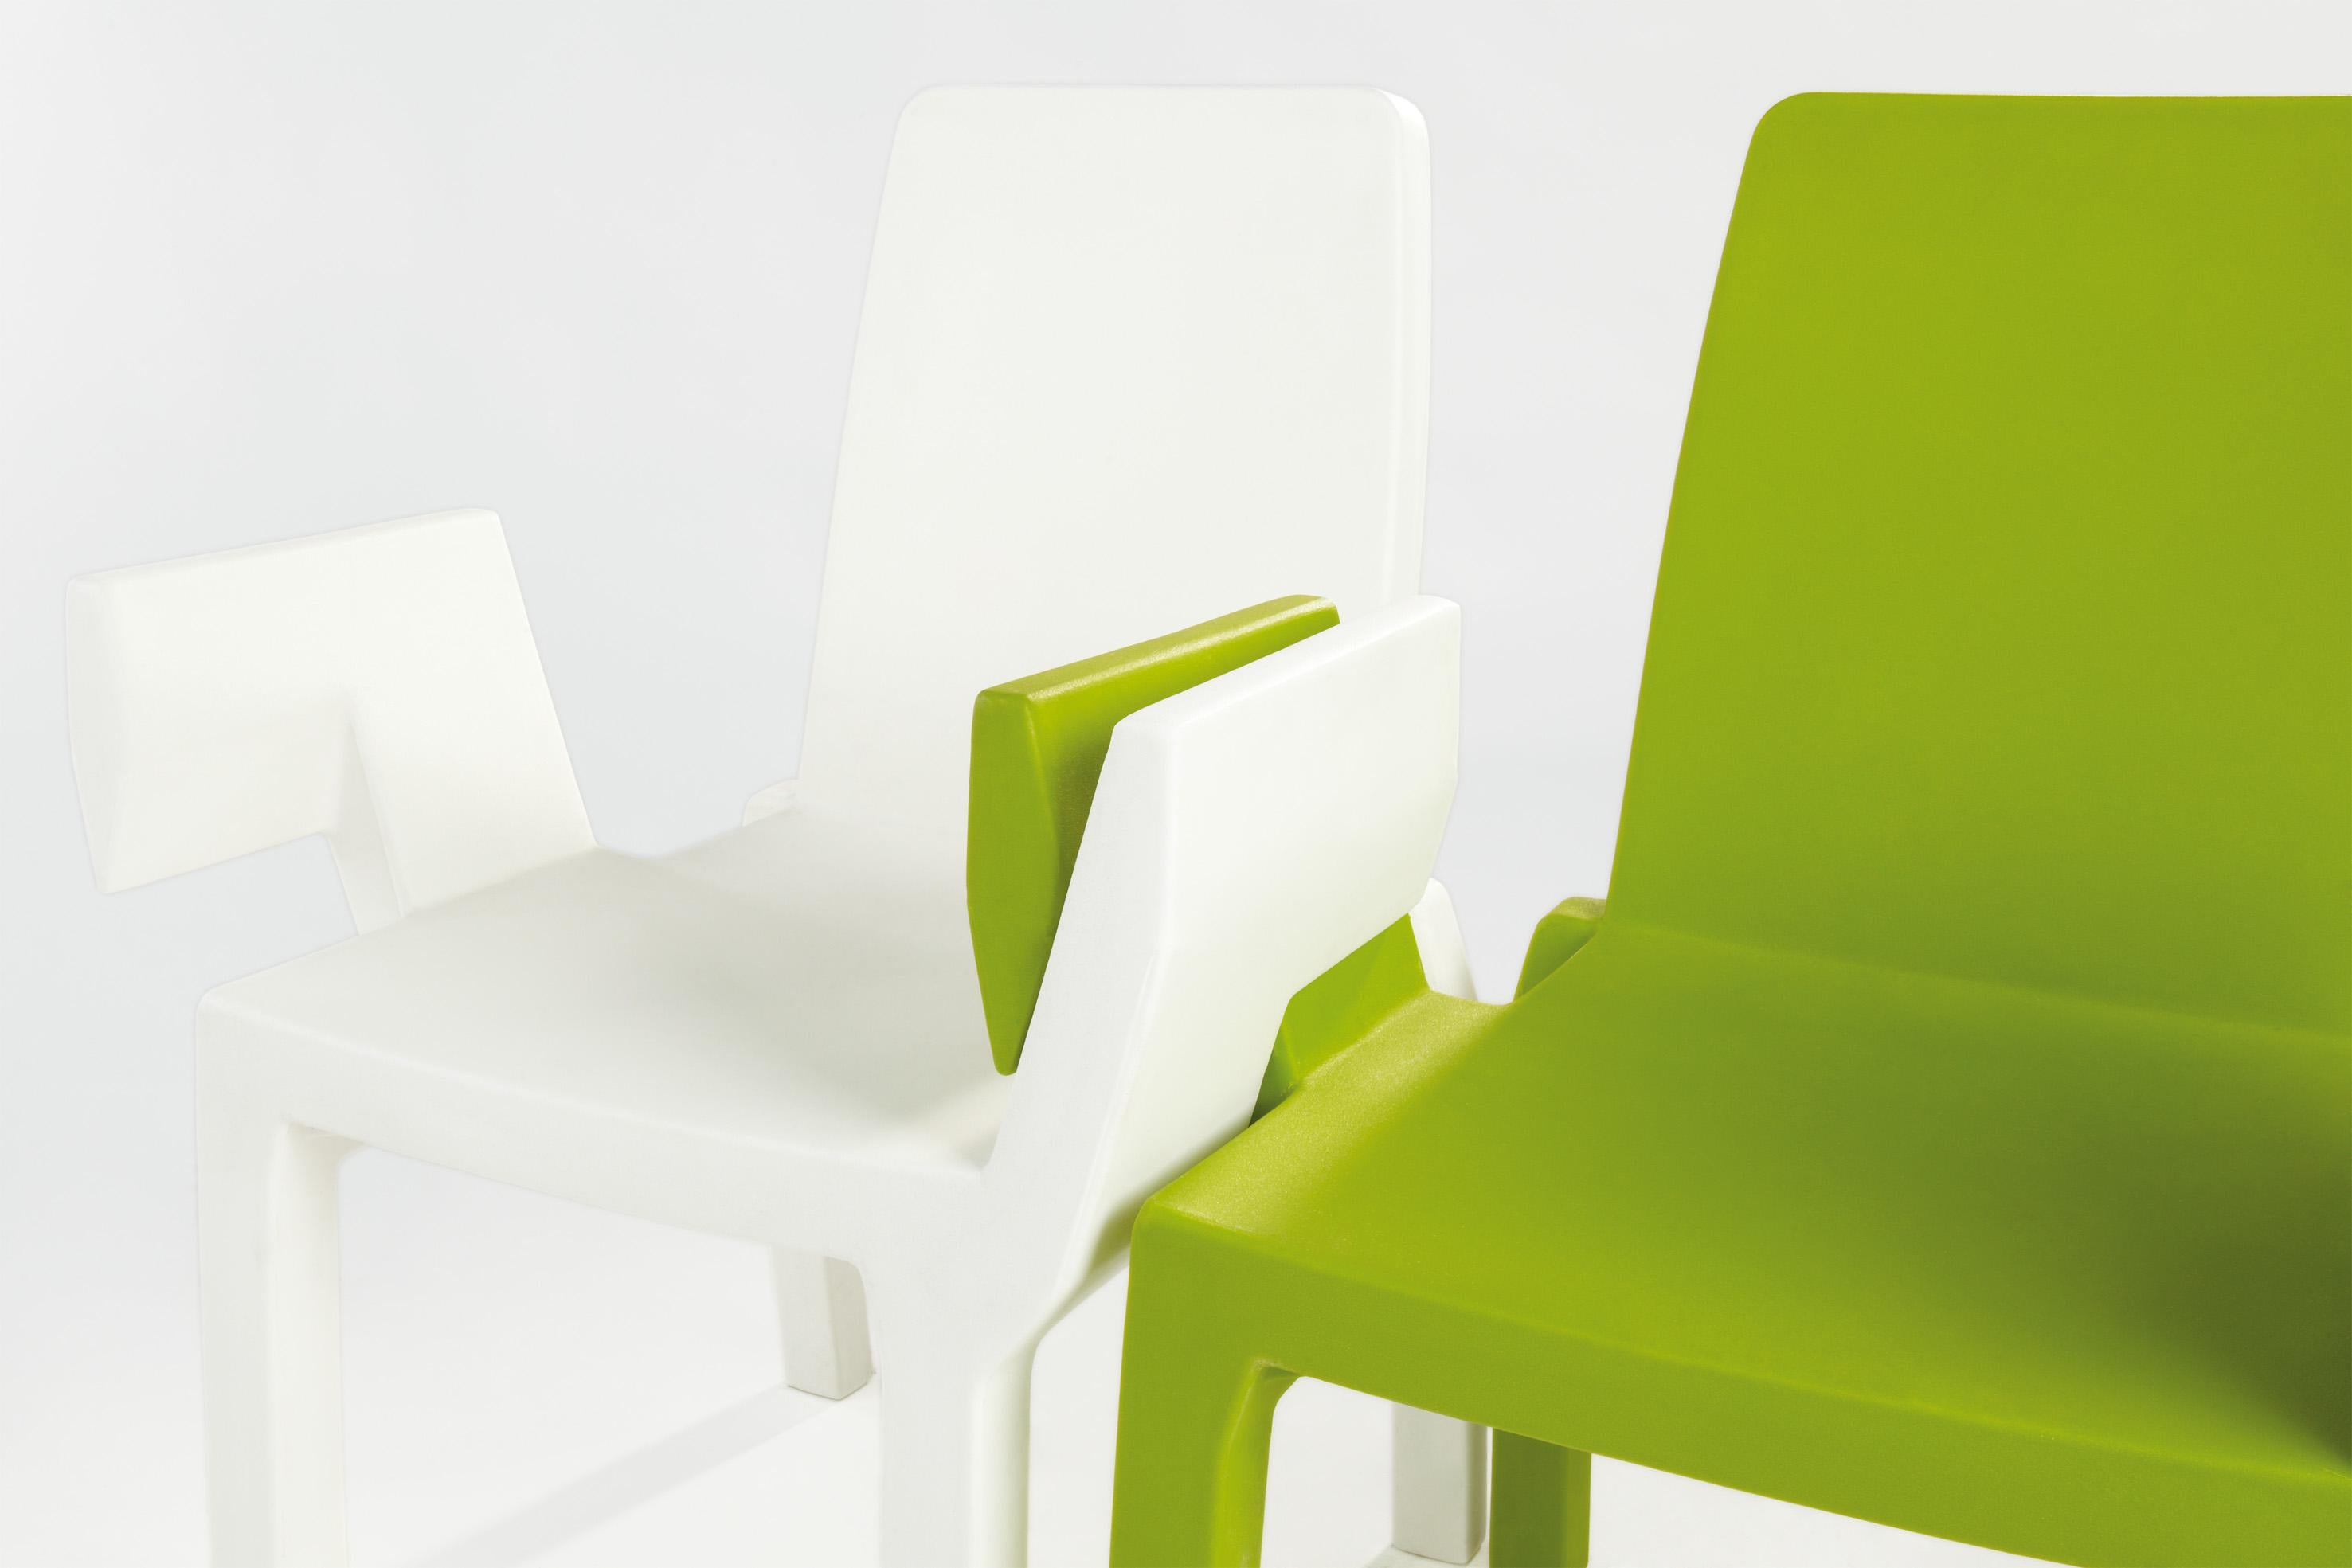 Lime Green Doublix Chair by Stirum Design
Dimensions: D 57 x W 61 x H 88 cm. Seat Height: 43 cm.
Materials: Polyethylene.
Weight: 10 kg.

Available in different color options. This product is suitable for indoor and outdoor use. Stackable product.